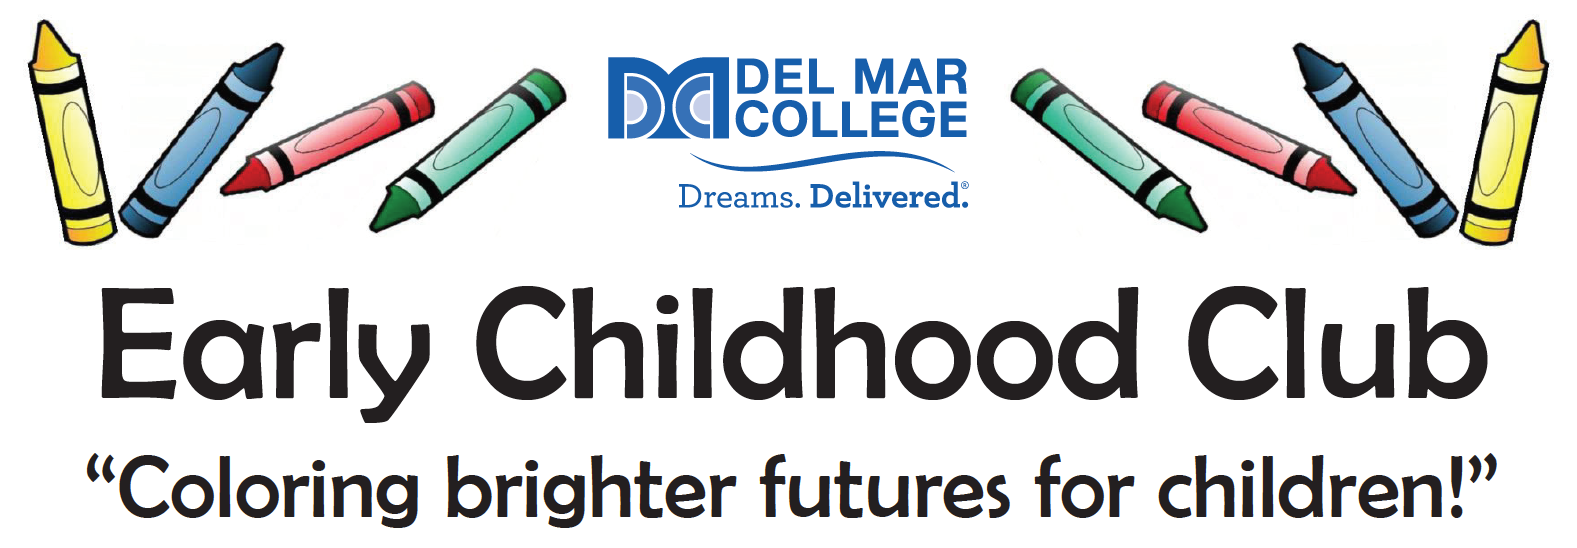 Early Childhood Club banner - Coloring brighter futures for children!